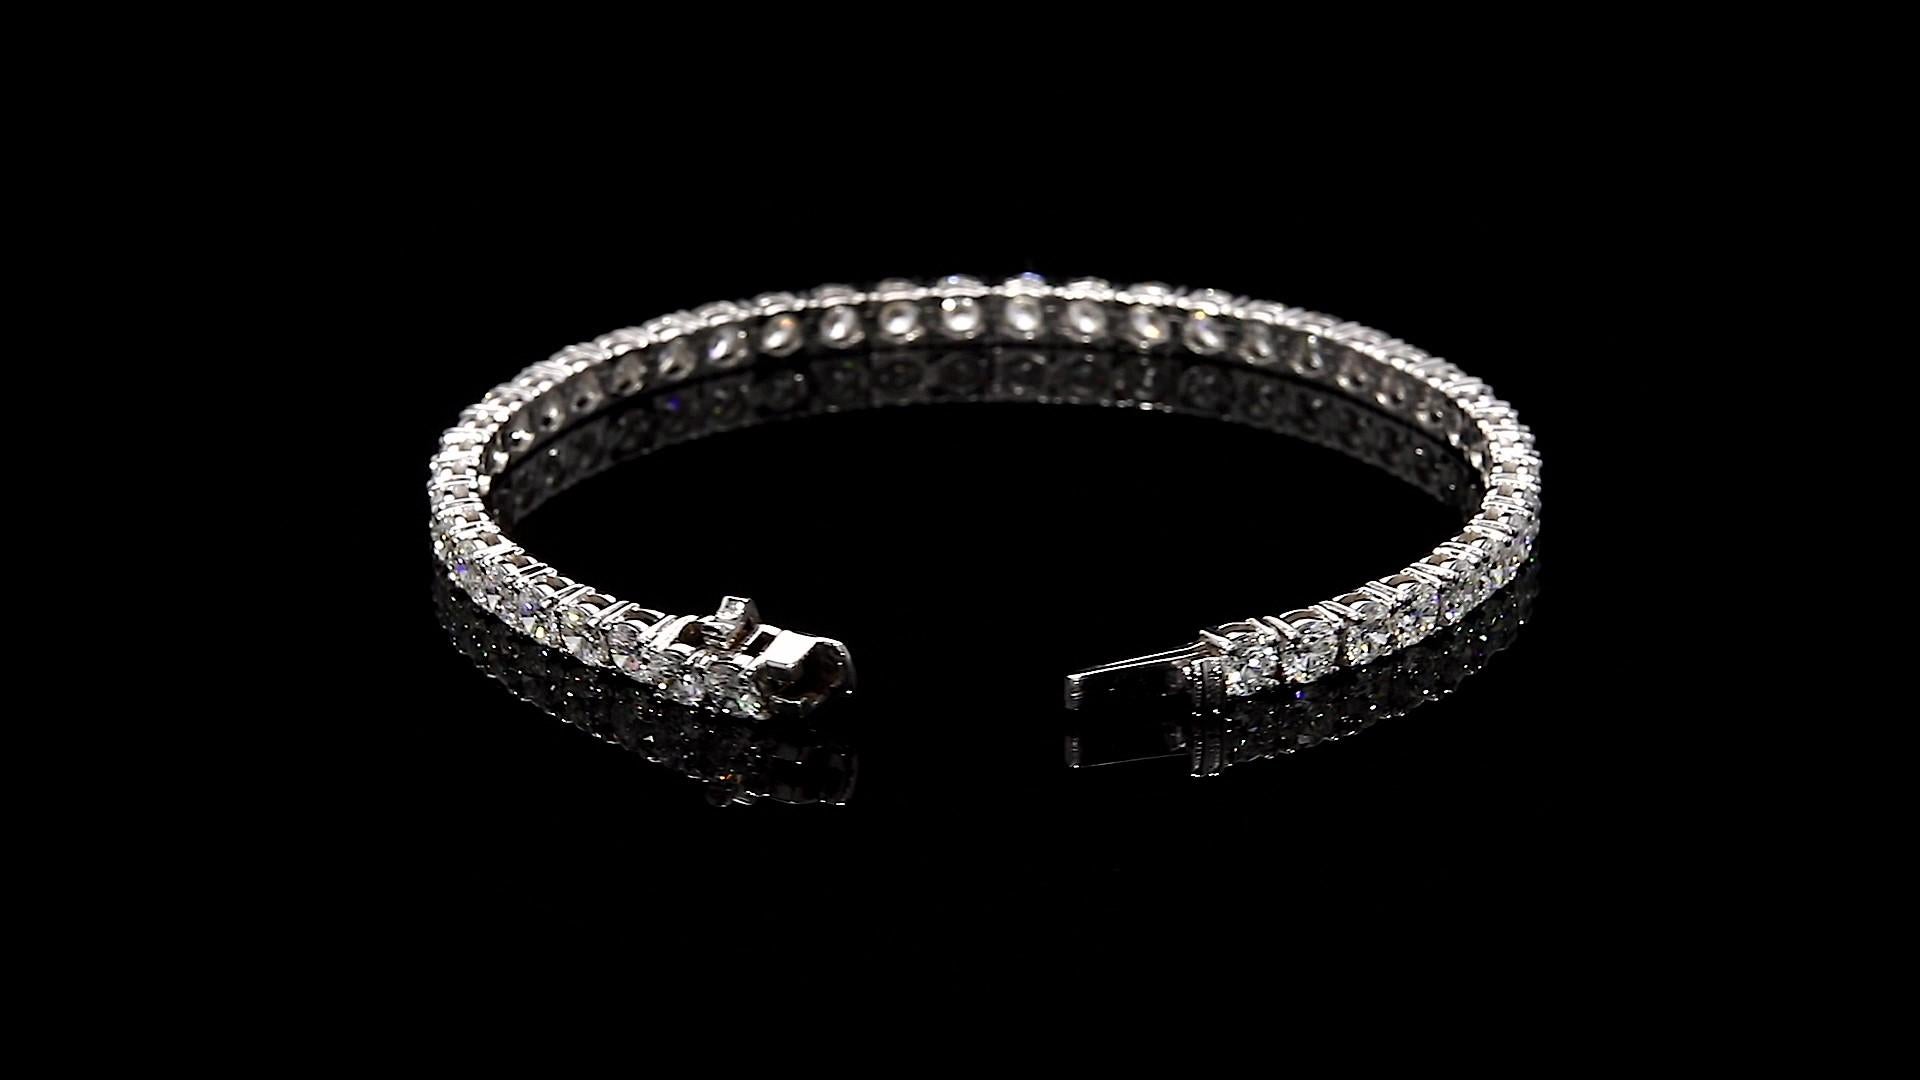 Diamond Tennis Bracelet 8.25 Total Carat Weight 18K White Gold

With Round Diamonds, 0.18-0.19 Carats Each 

Diamonds are DEF in Color and VS2 in Clarity

With GIA Certificates

Total Carat Weight is 8.25 Carats 

4-Prong Setting

Set in 18 Karat